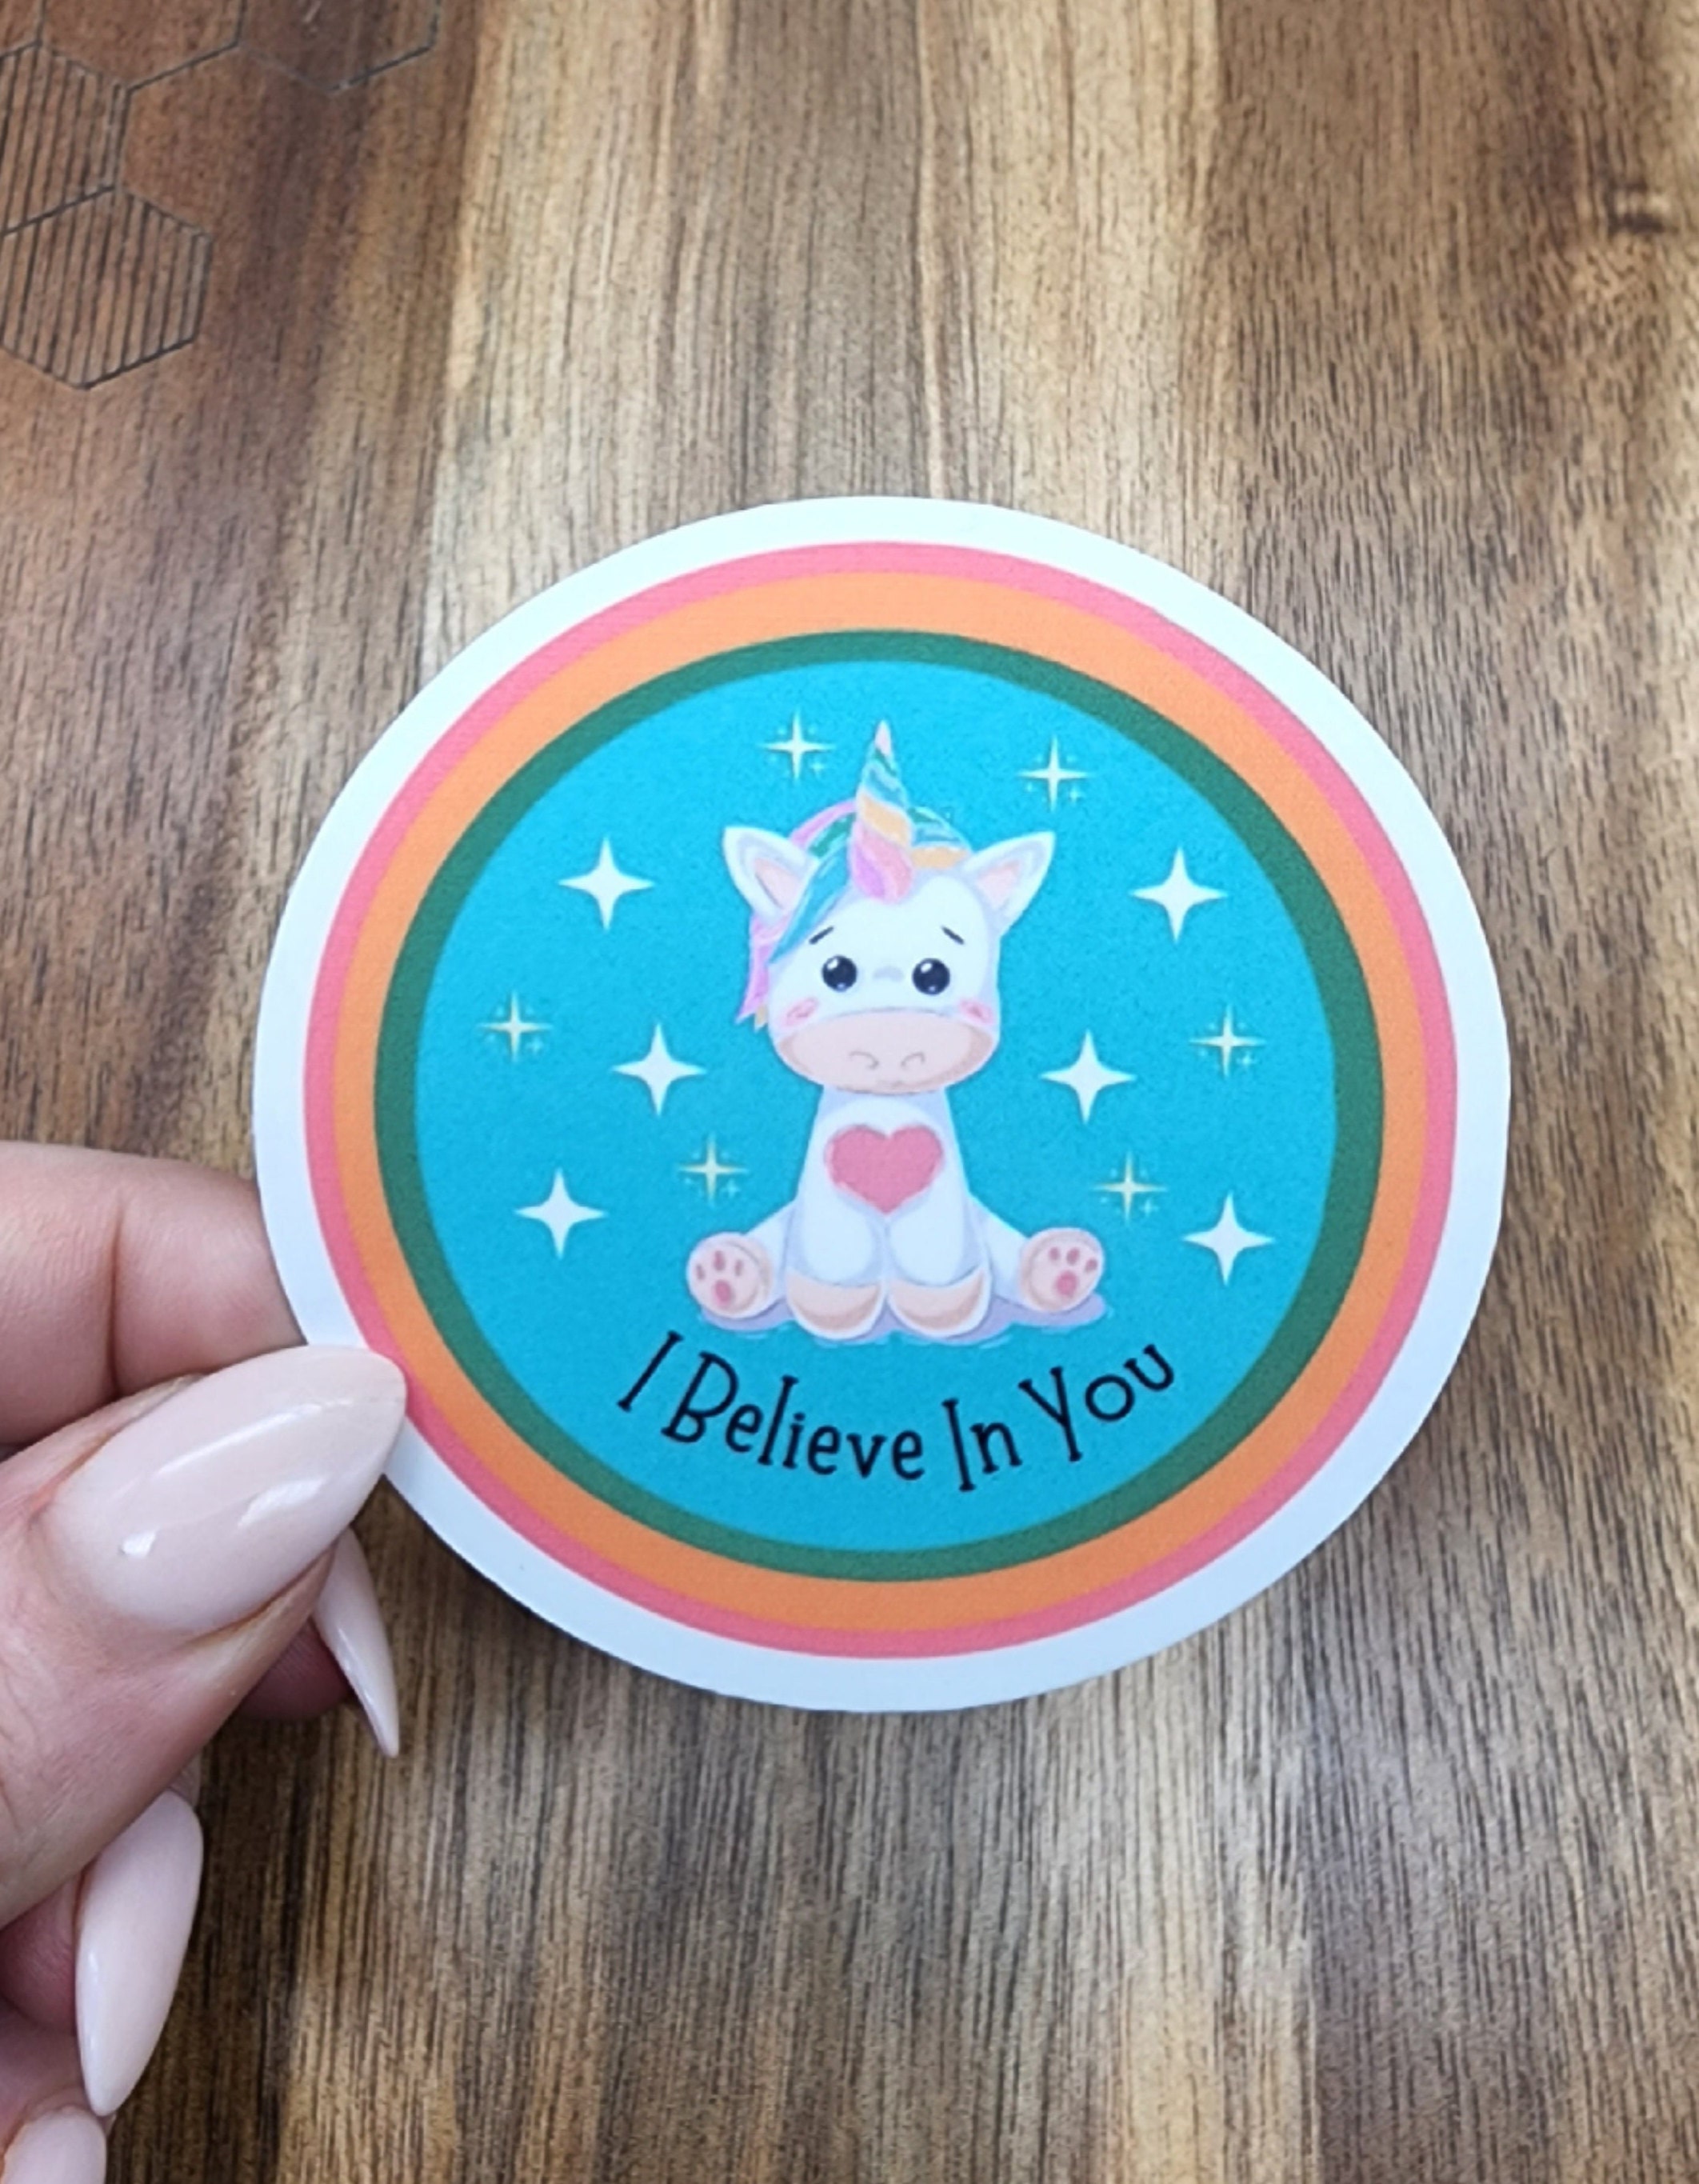 I BELIEVE IN ME - Inspirational Stickers for kids – TinySpark Boutique